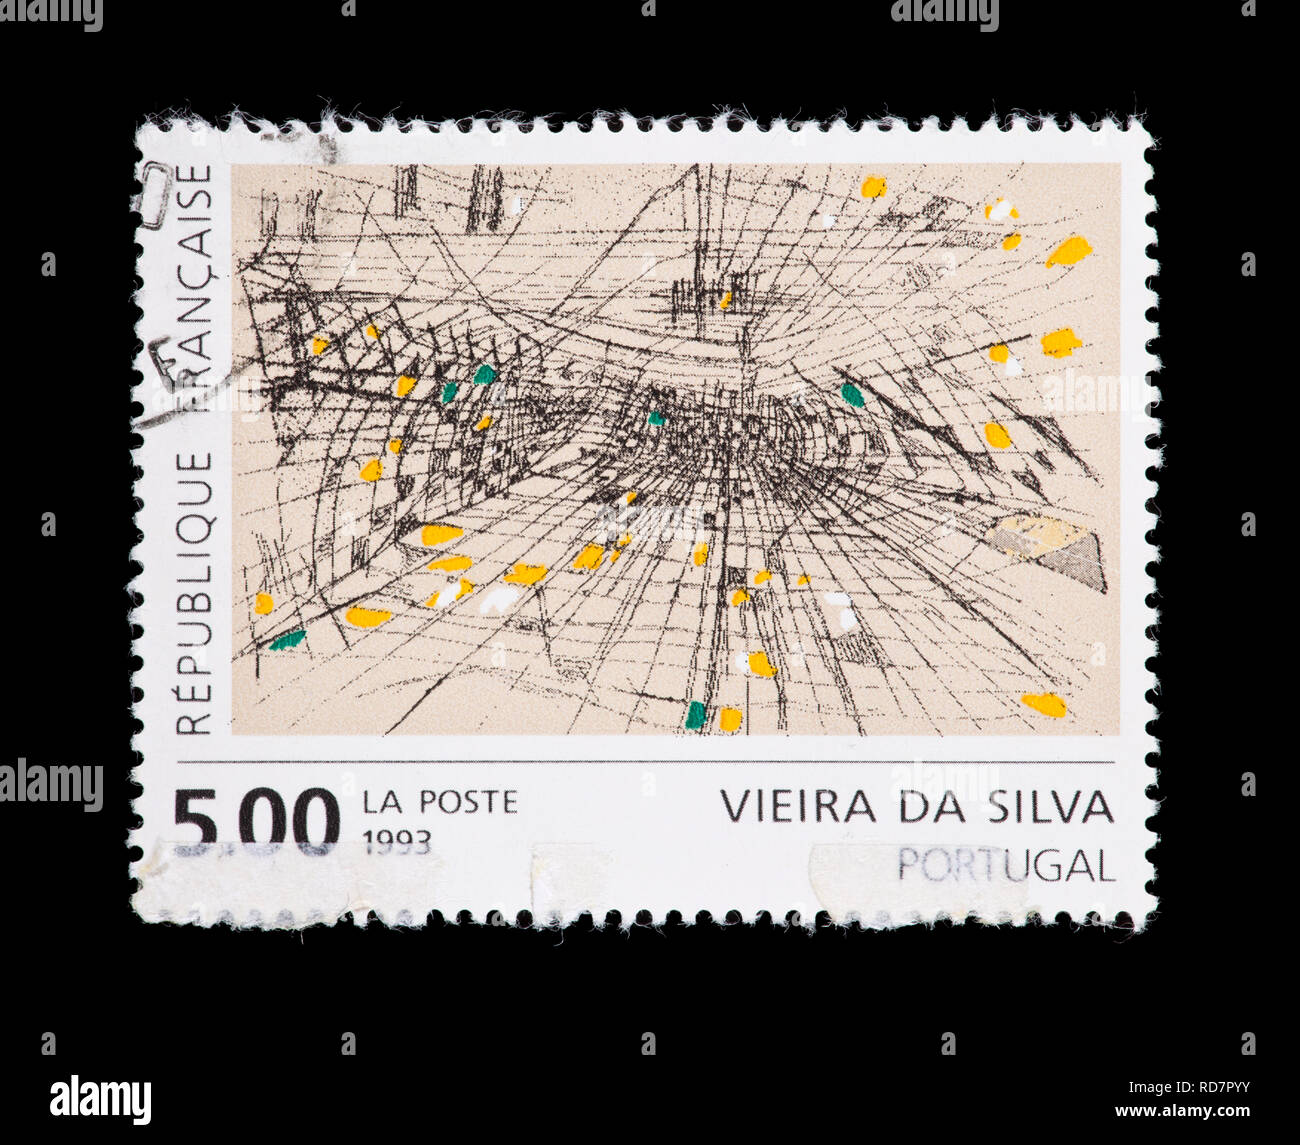 Postage stamp from France depicting an abstract painting by Maria Helena Vieira da Silva. Stock Photo